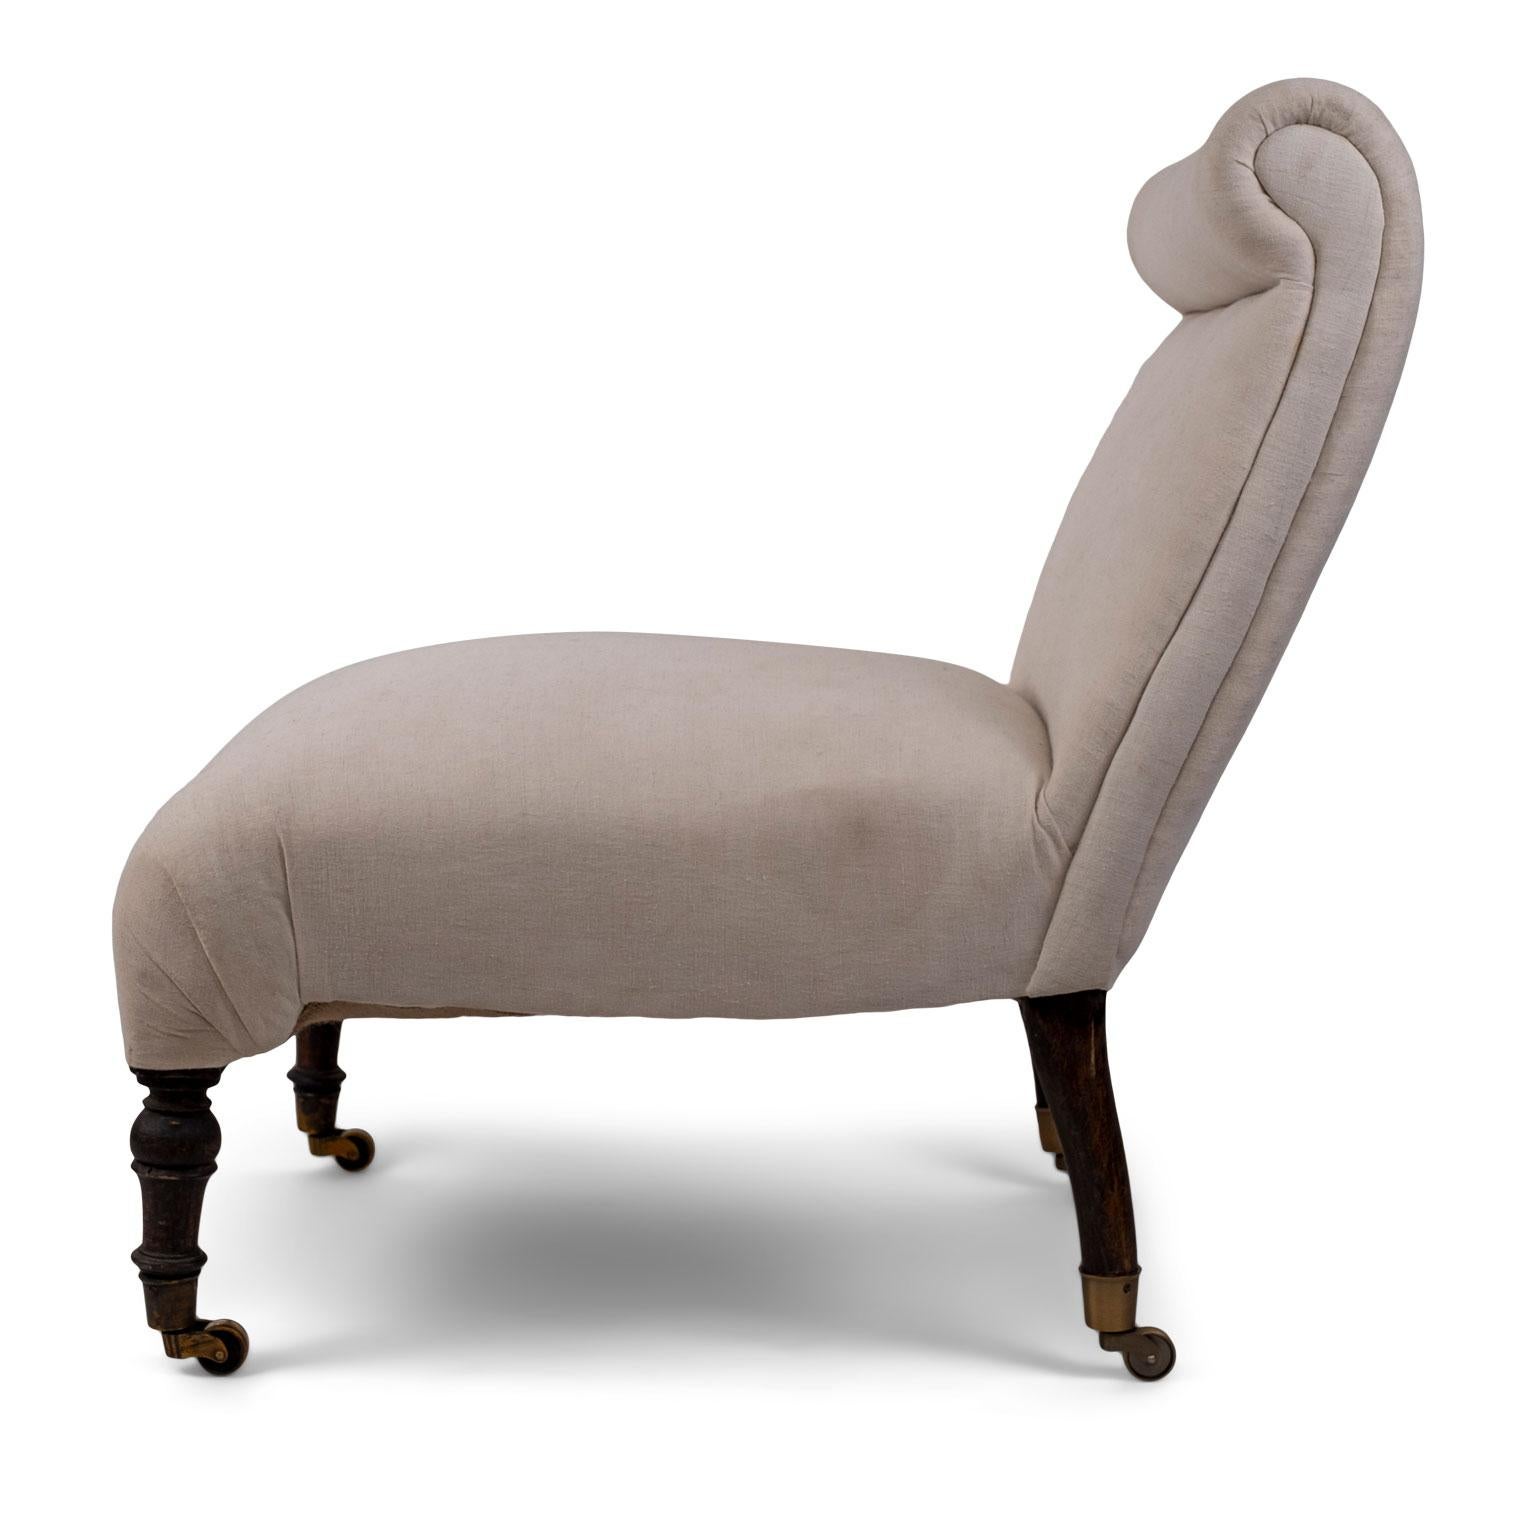 19th century English slipper chair on casters: roll-shape back, turned front legs and remnants of brown paint on legs. Covered in vintage muslin (to be upholstered in your own fabric).